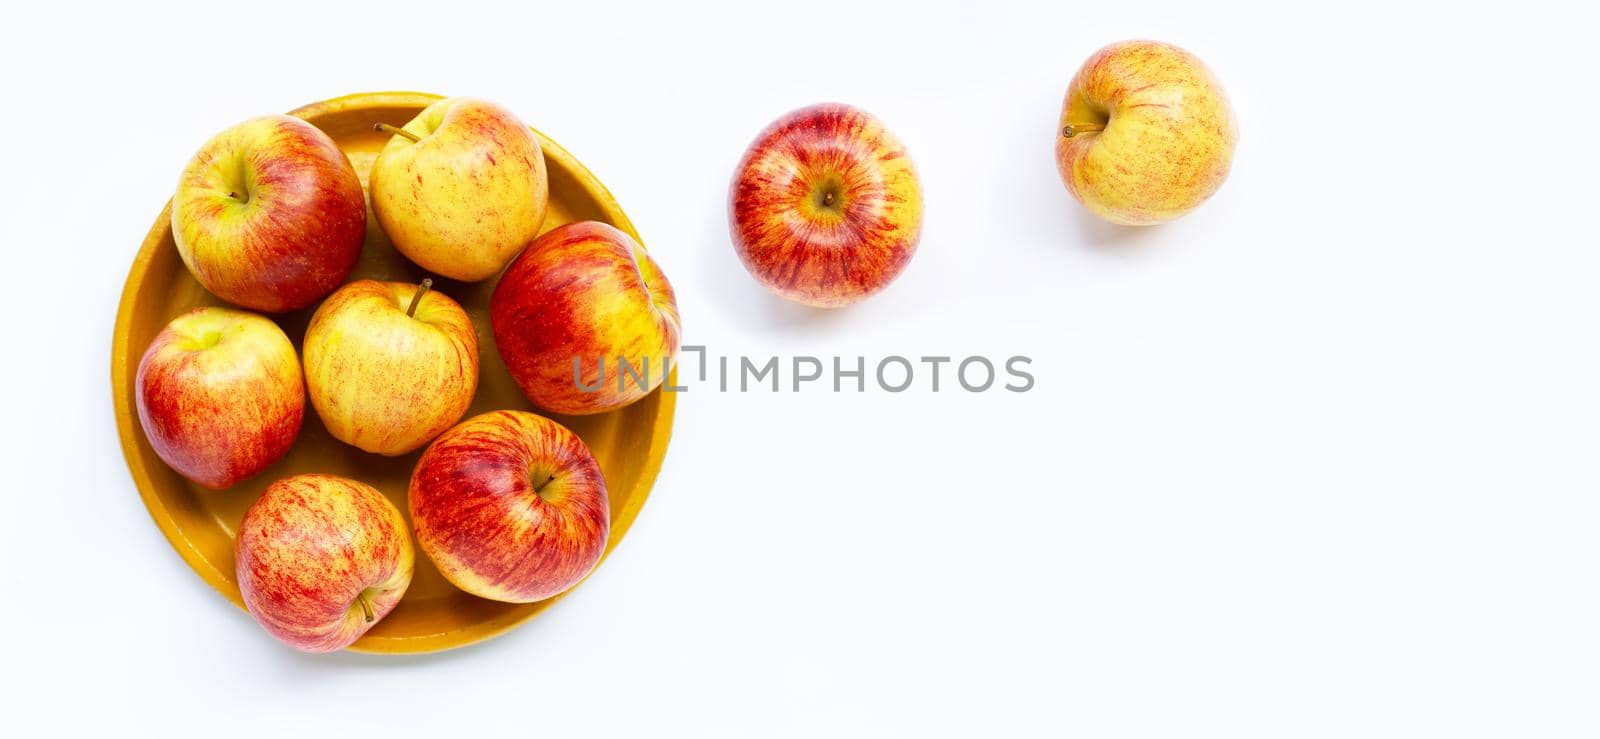 Ripe apples on white background. by Bowonpat